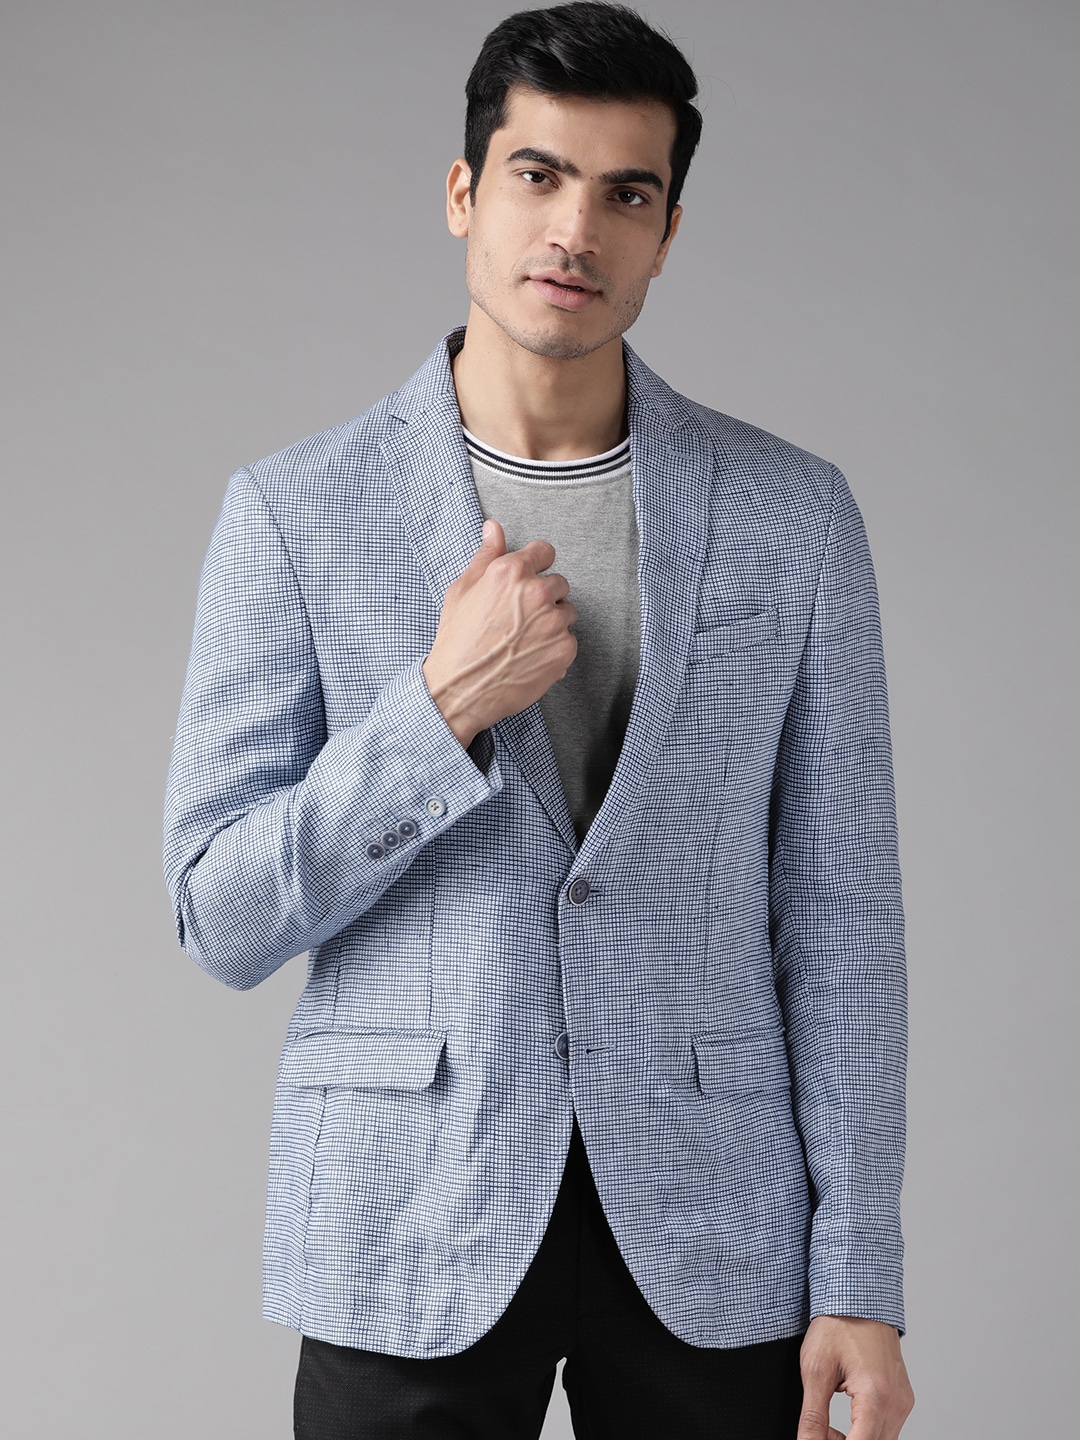 11 Best Blazer for Men -Brands for Casual & Wedding Collection